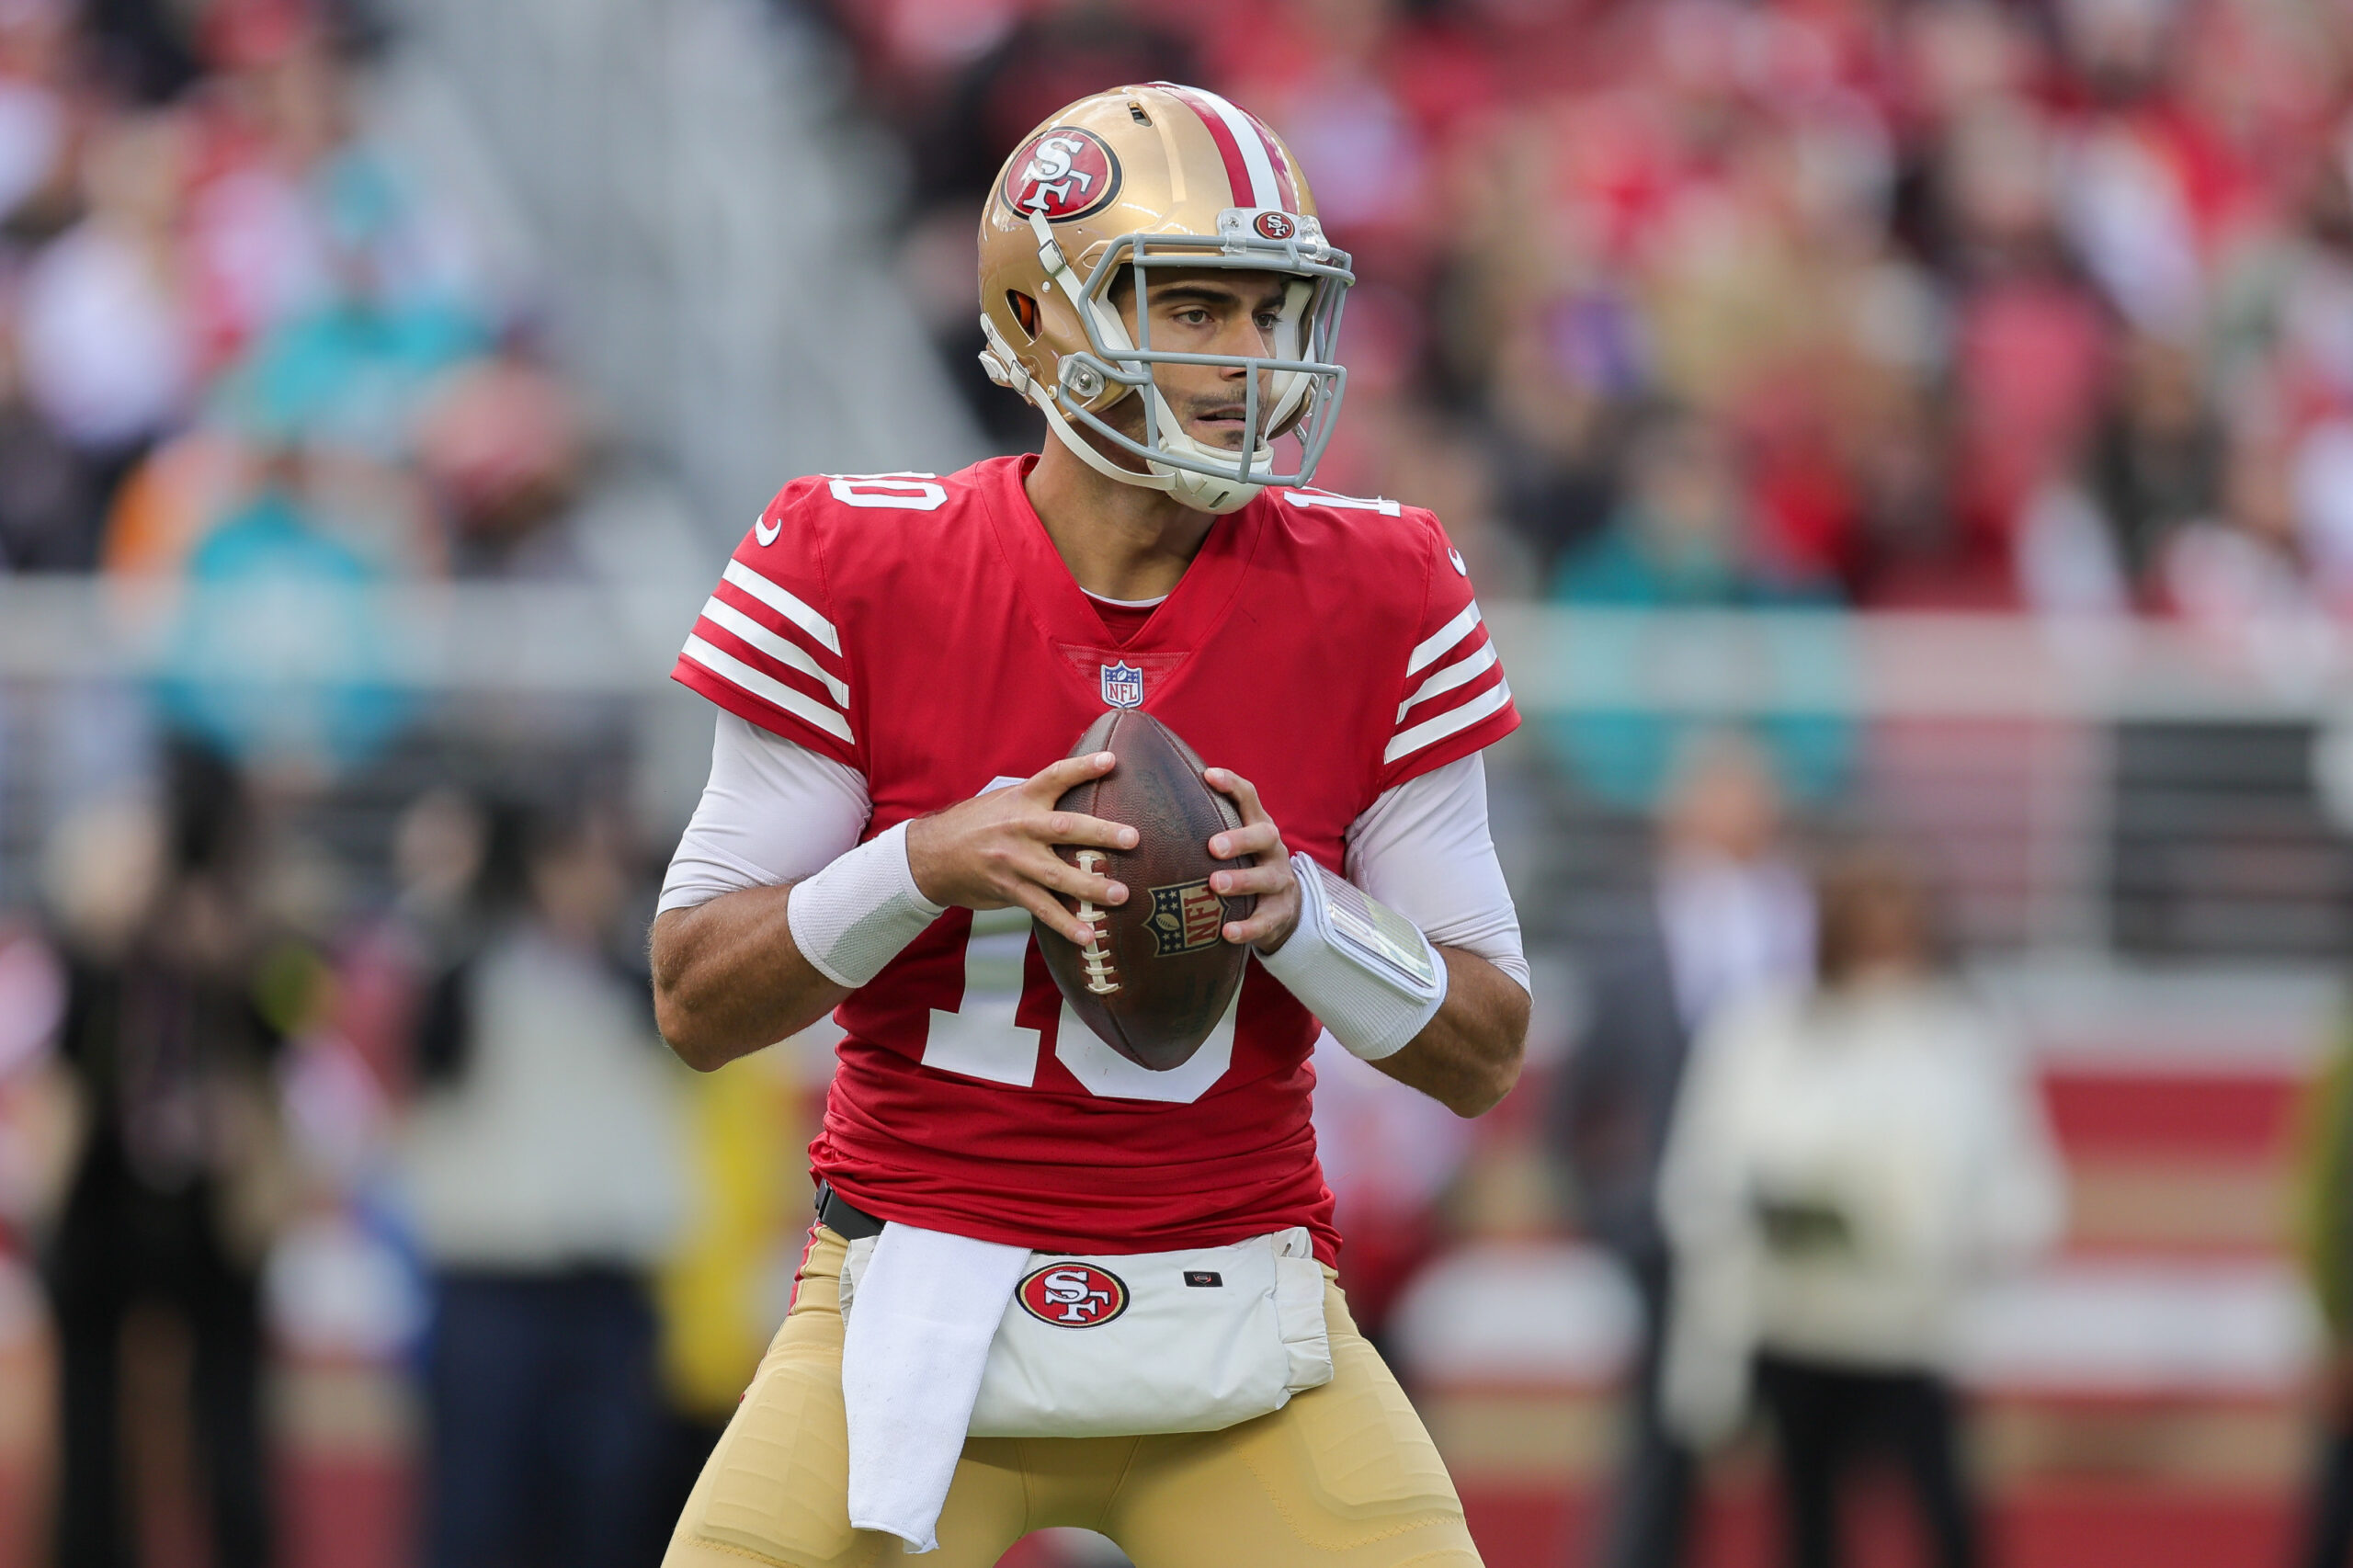 49ers camp review: Jimmy Garoppolo has looked rusty